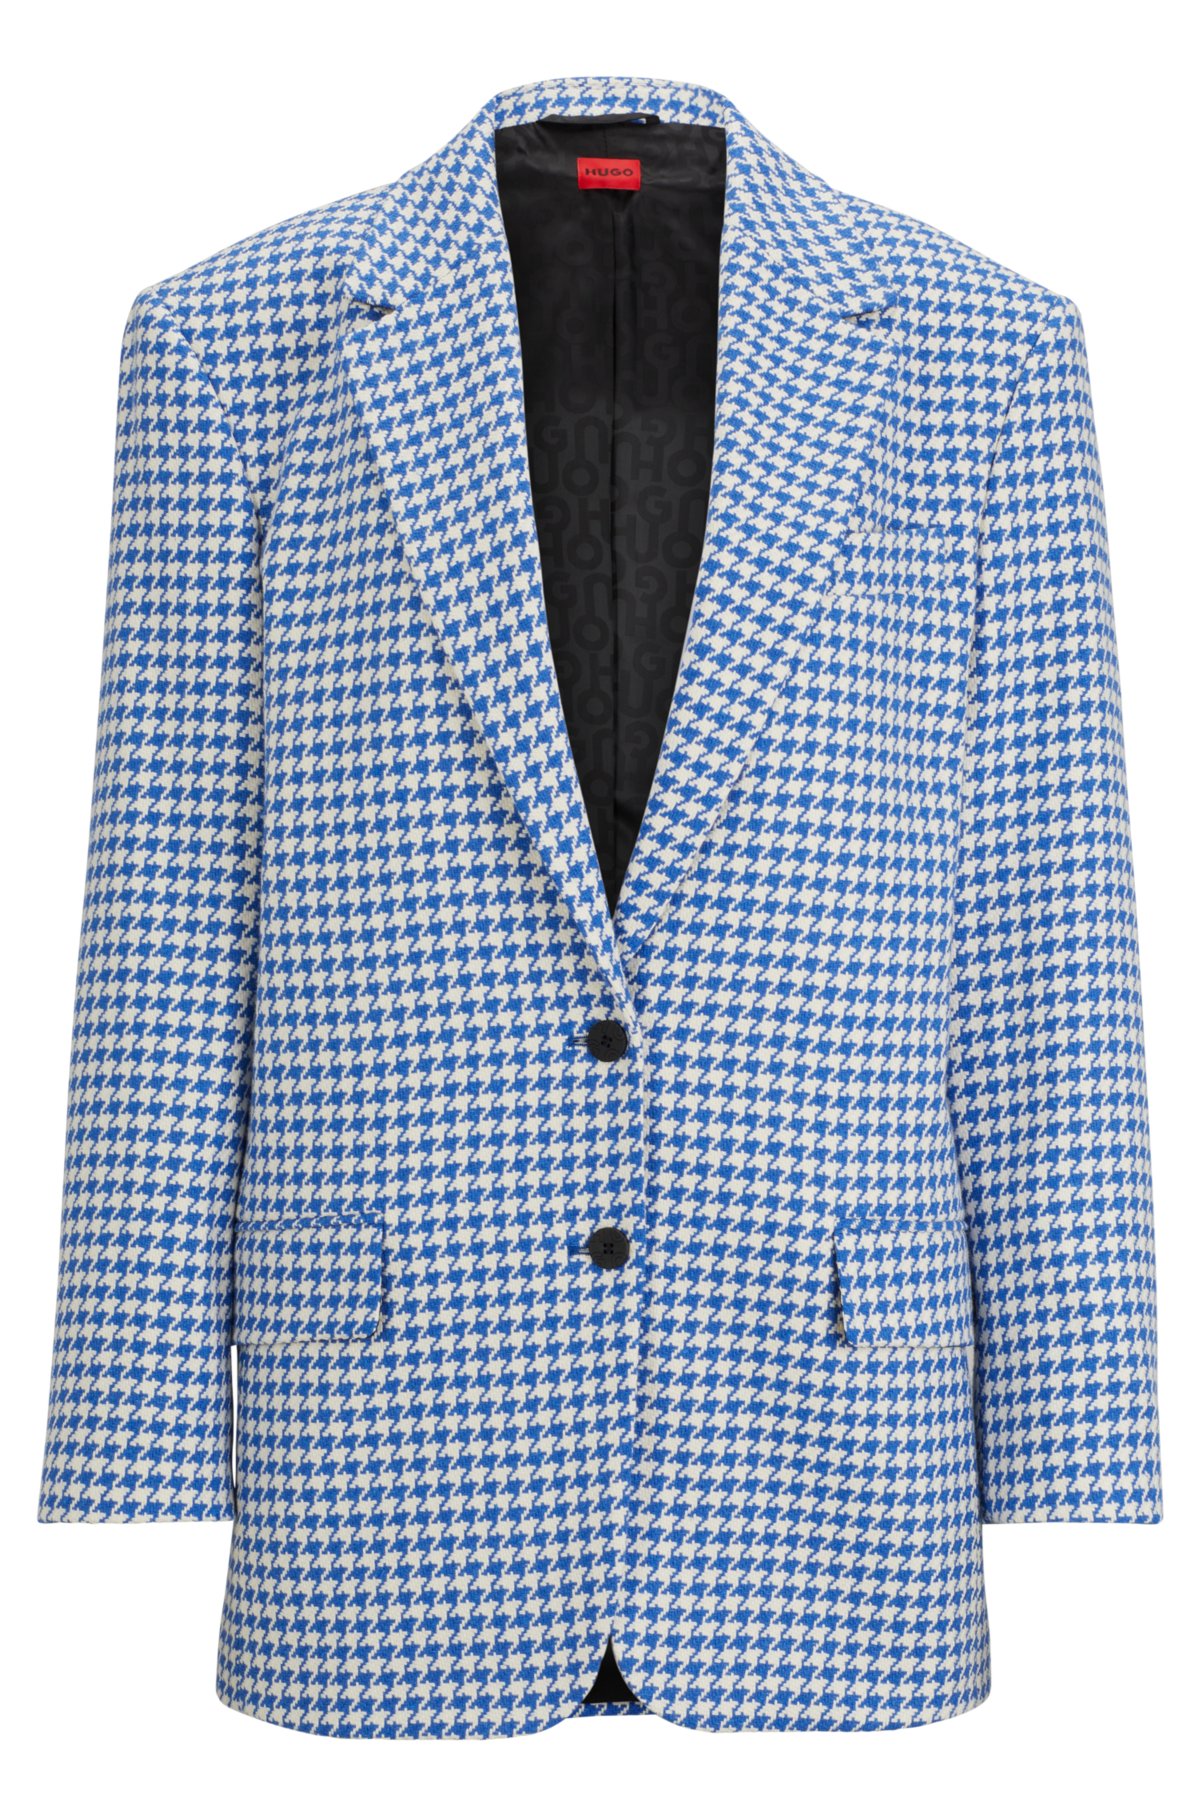 Oversized-fit jacket in a houndstooth cotton blend, Blue Patterned